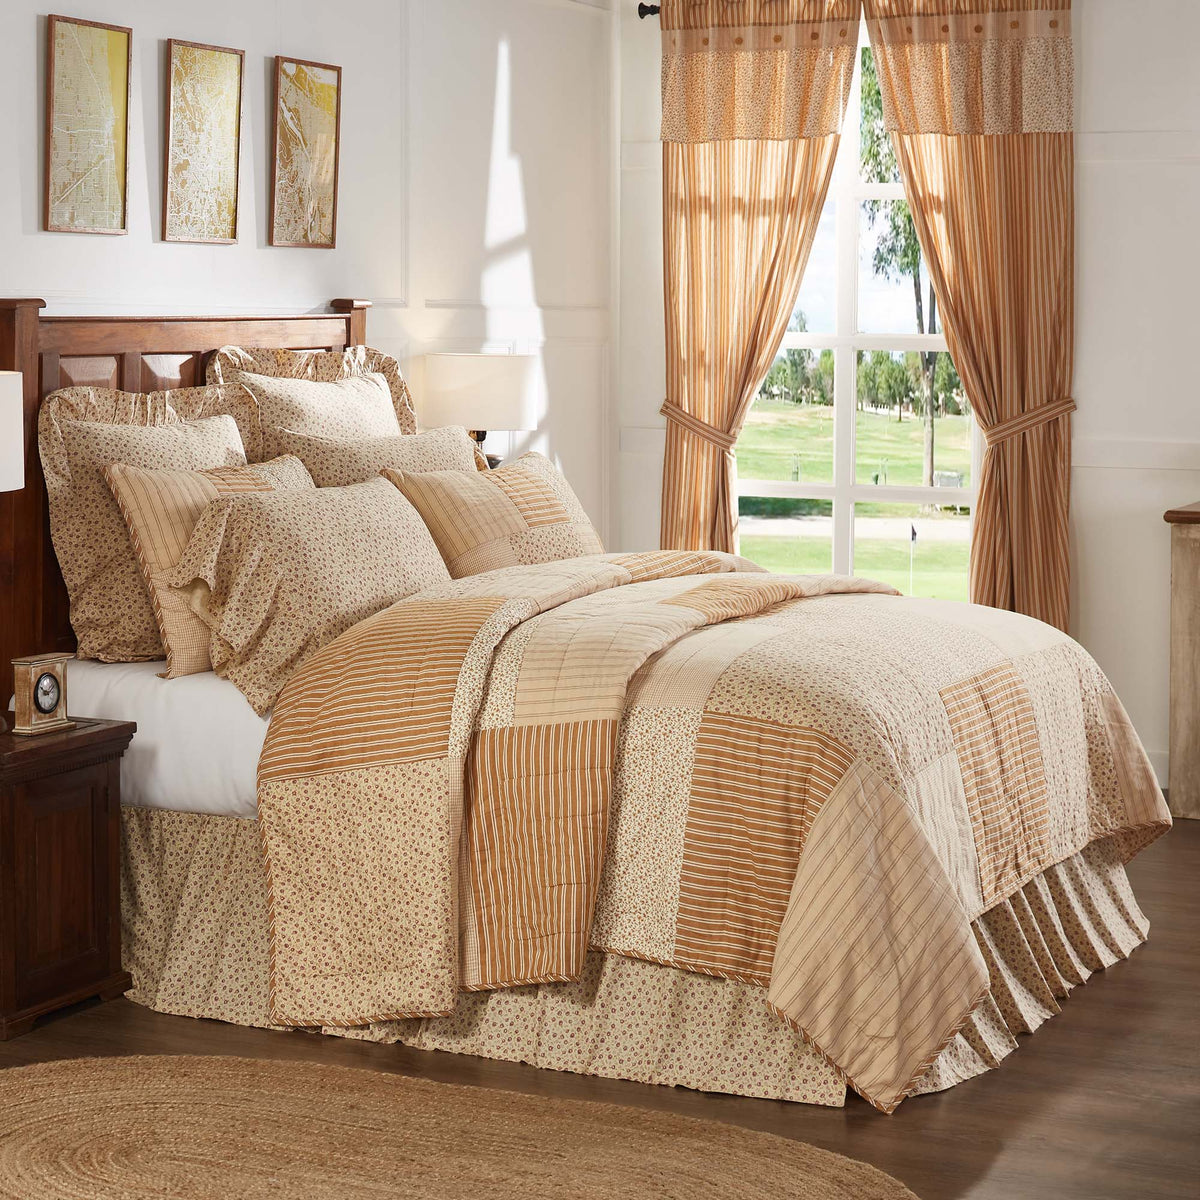 April & Olive Camilia King Quilt 105Wx95L By VHC Brands